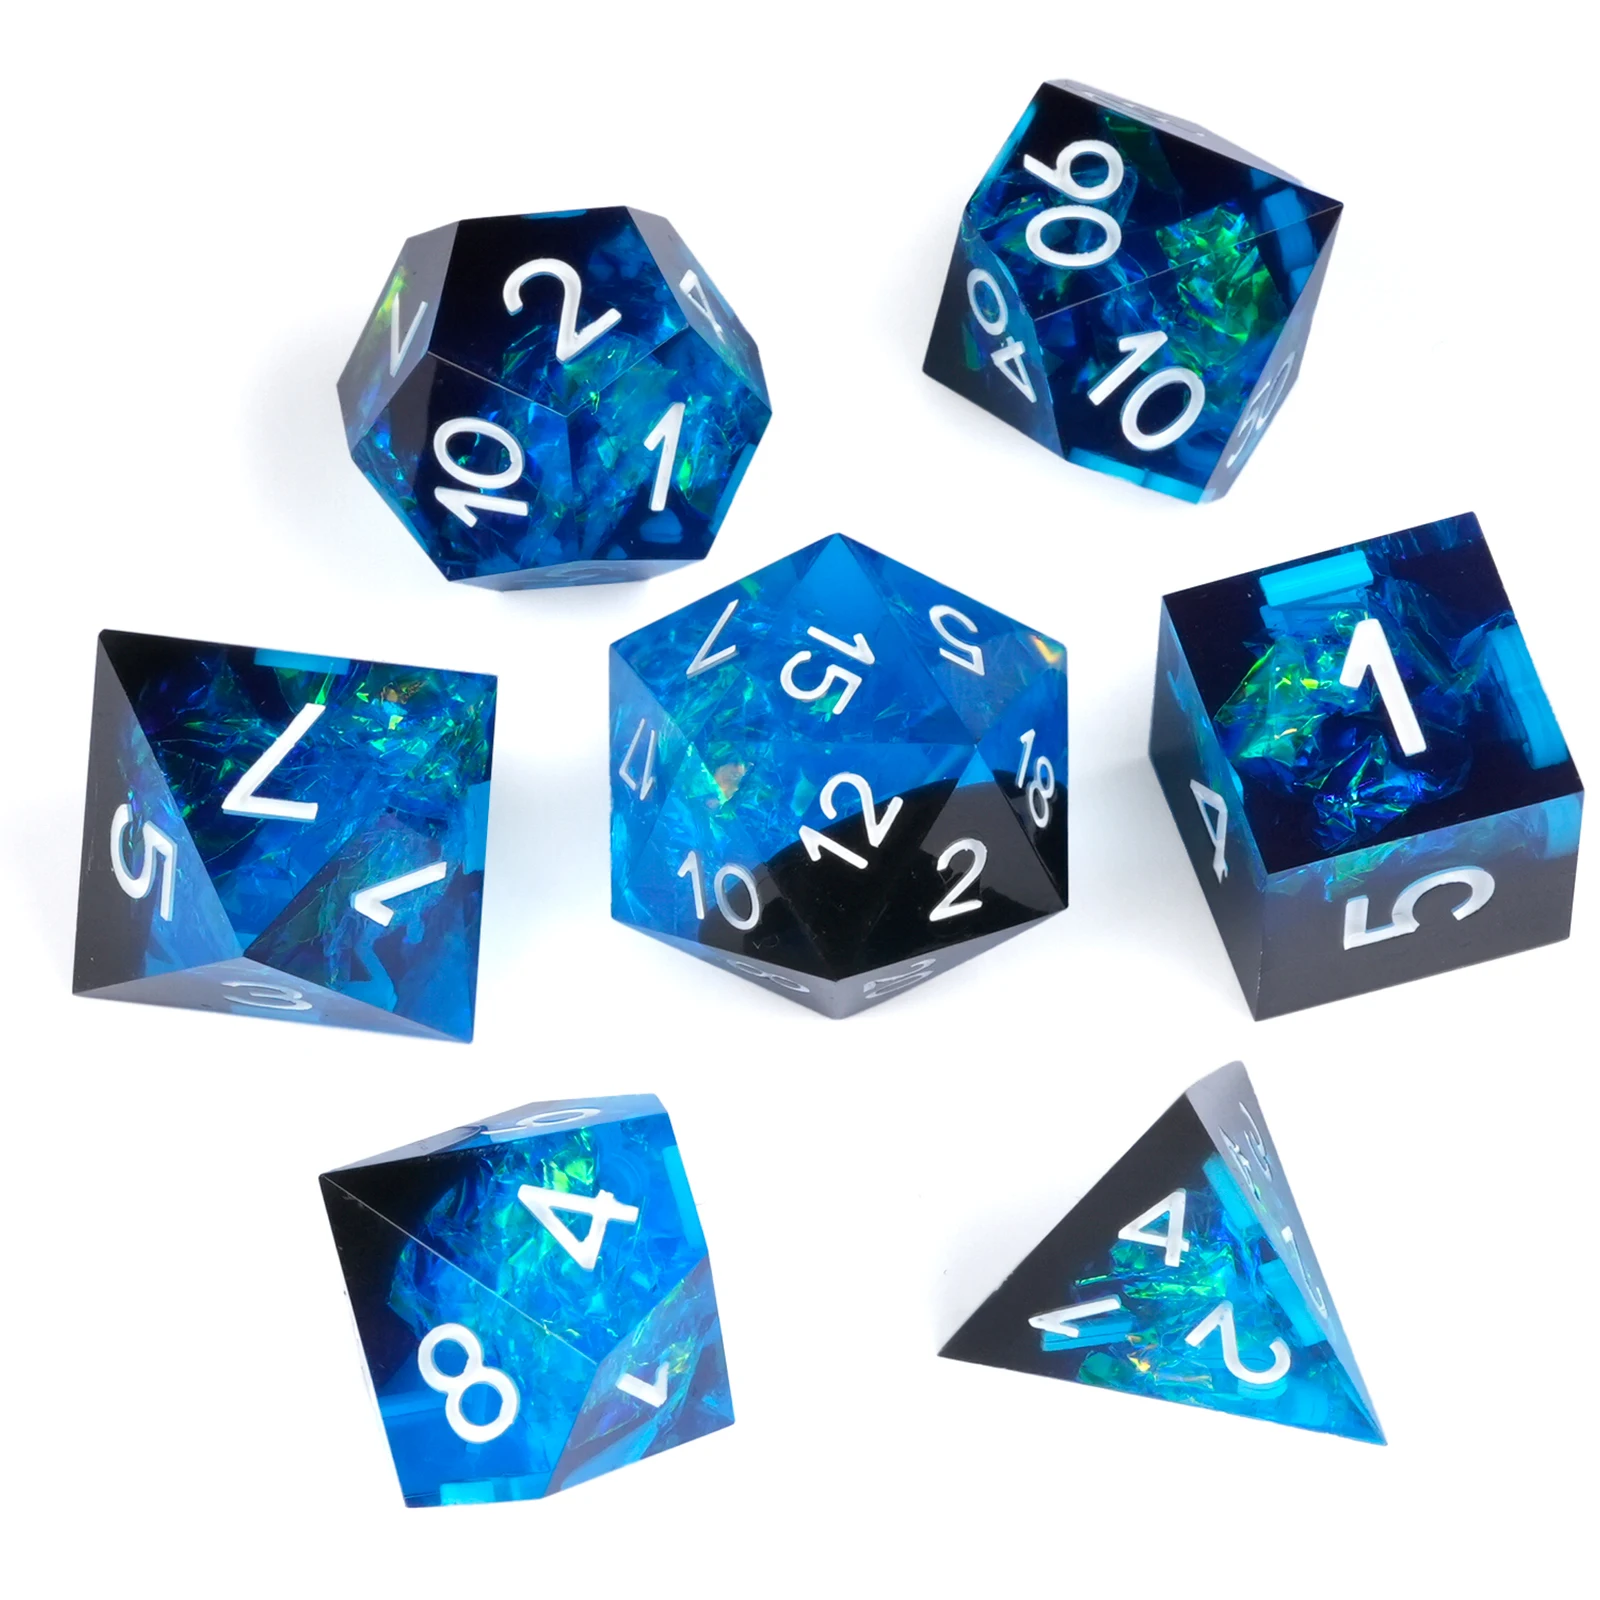 

7Pcs Coulorful Multi Sides Polyhedral Dice Set Resin Dices Table Games Accessory For D&d DND Party Supply Hot D6 D8 D10 D12 D20